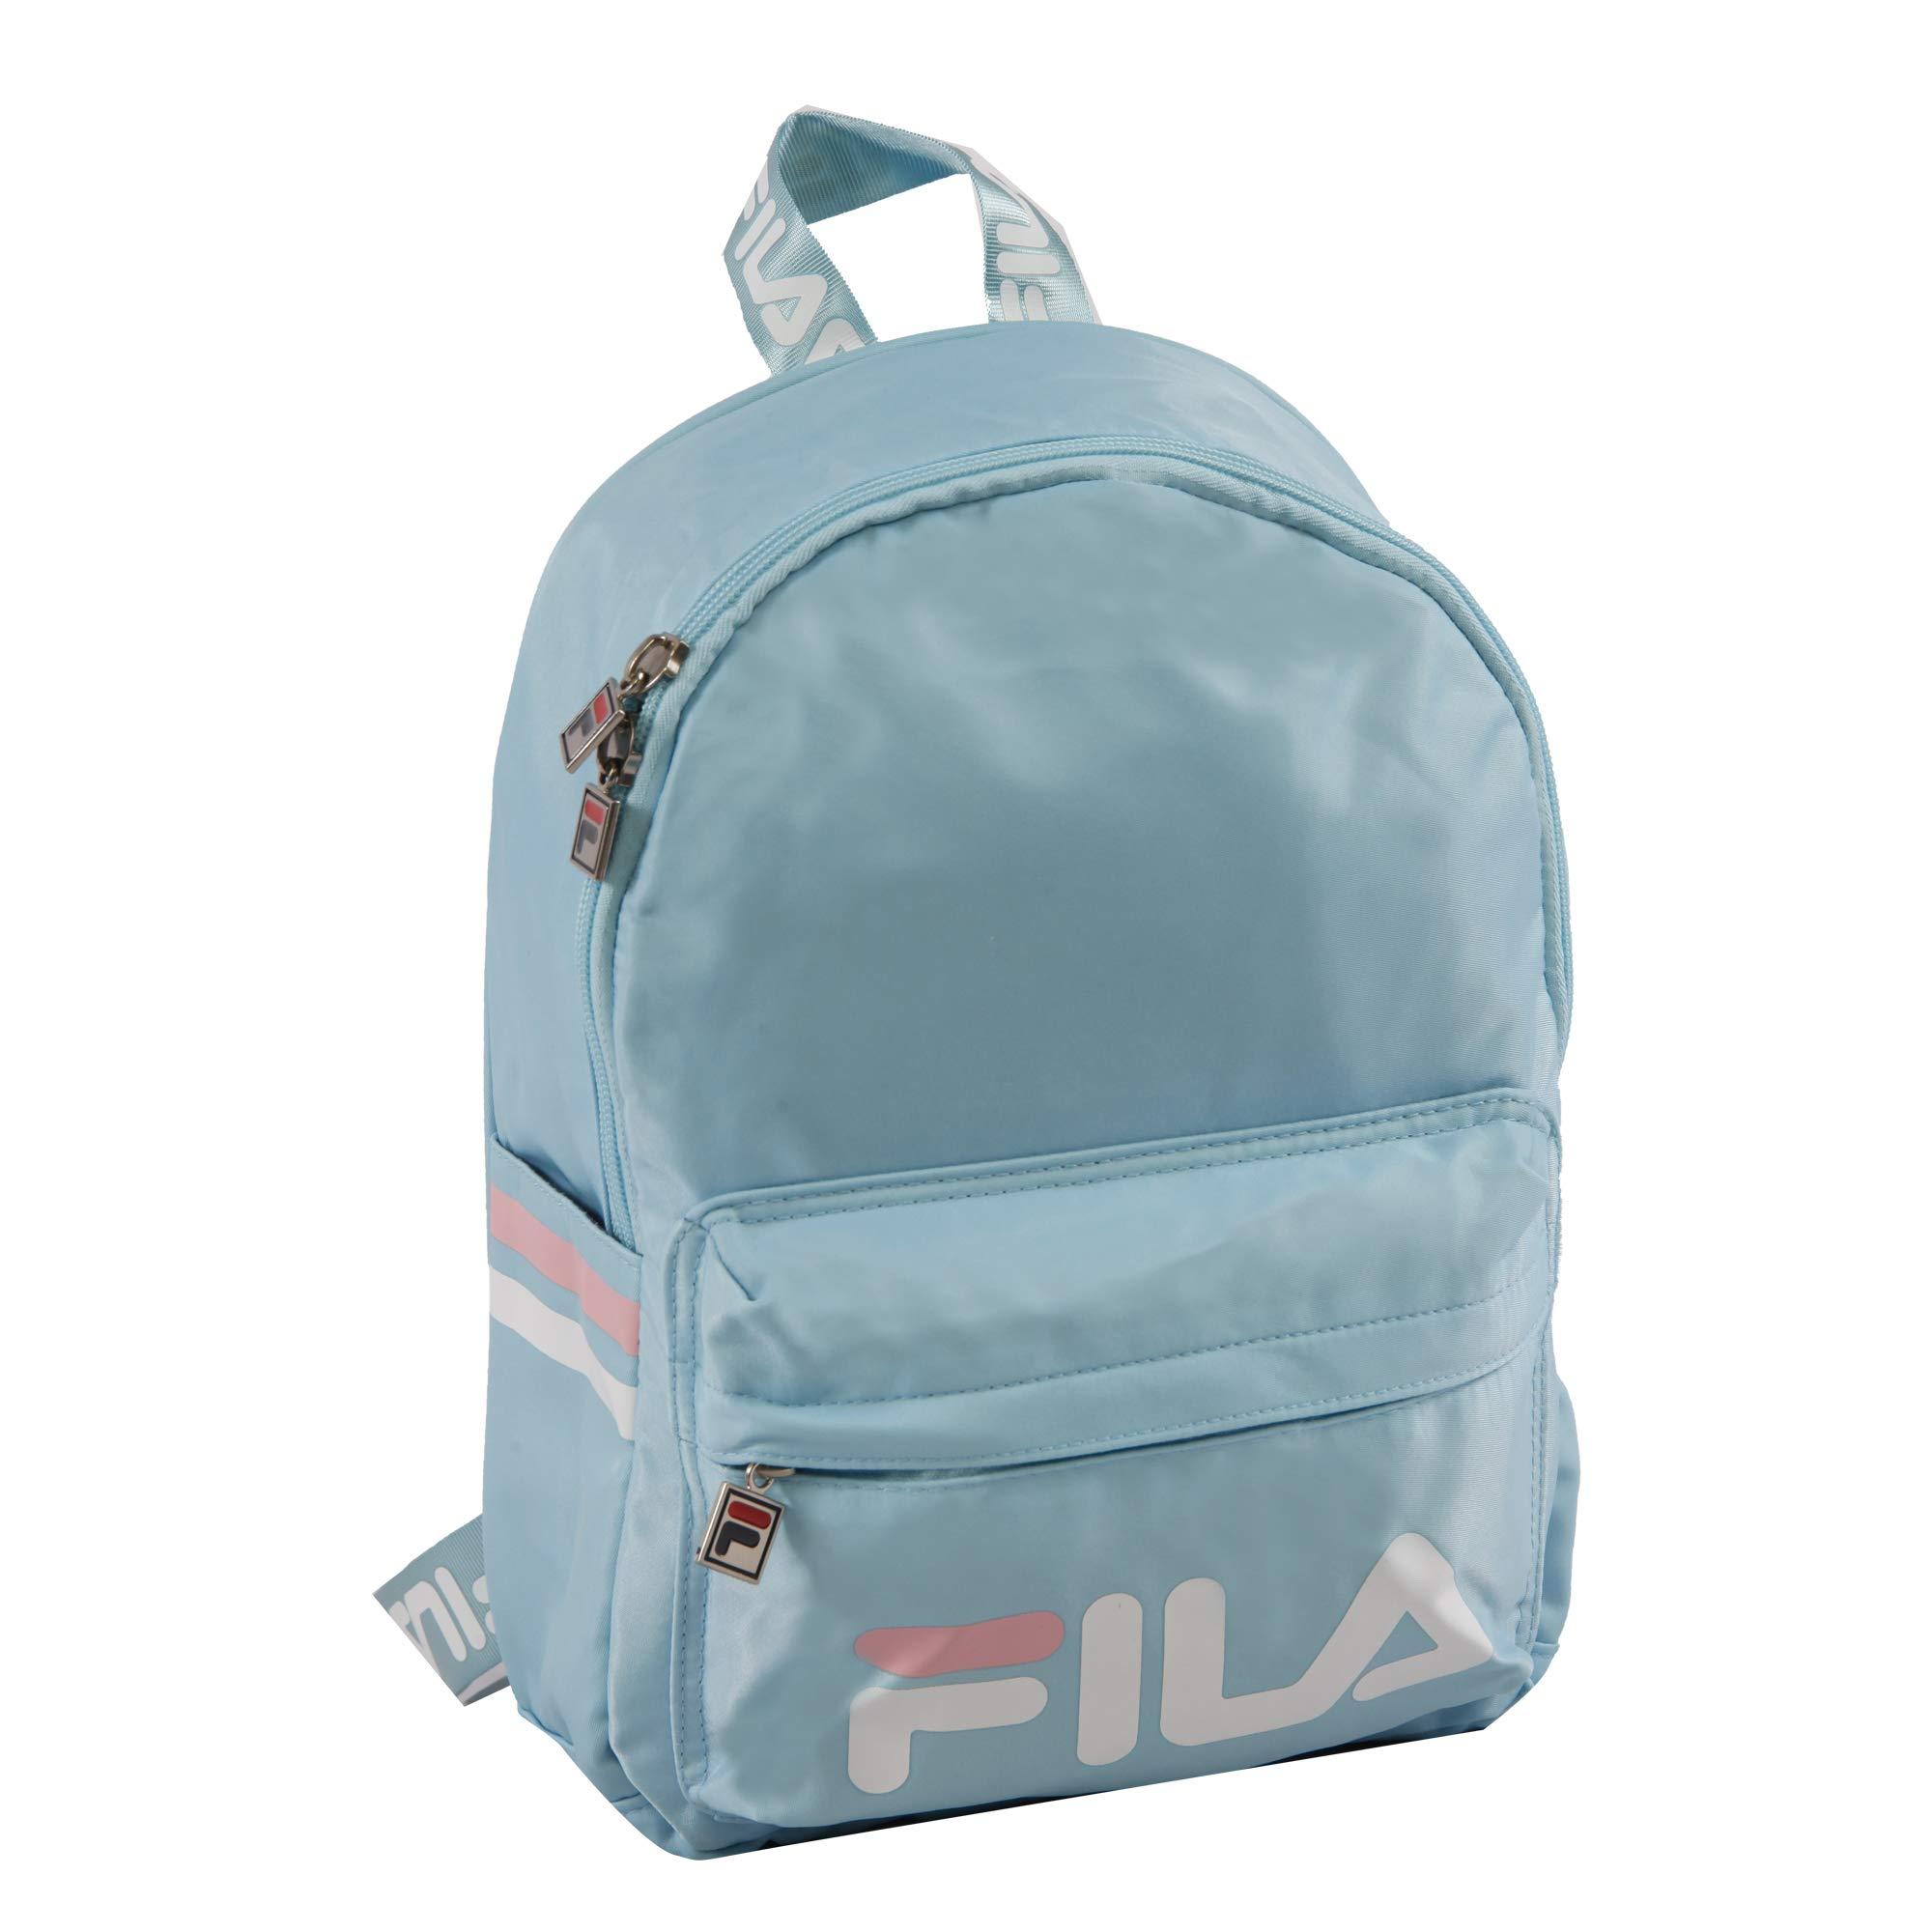 Fila Synthetic Backpack in Light Blue (Blue) - Save 17% - Lyst